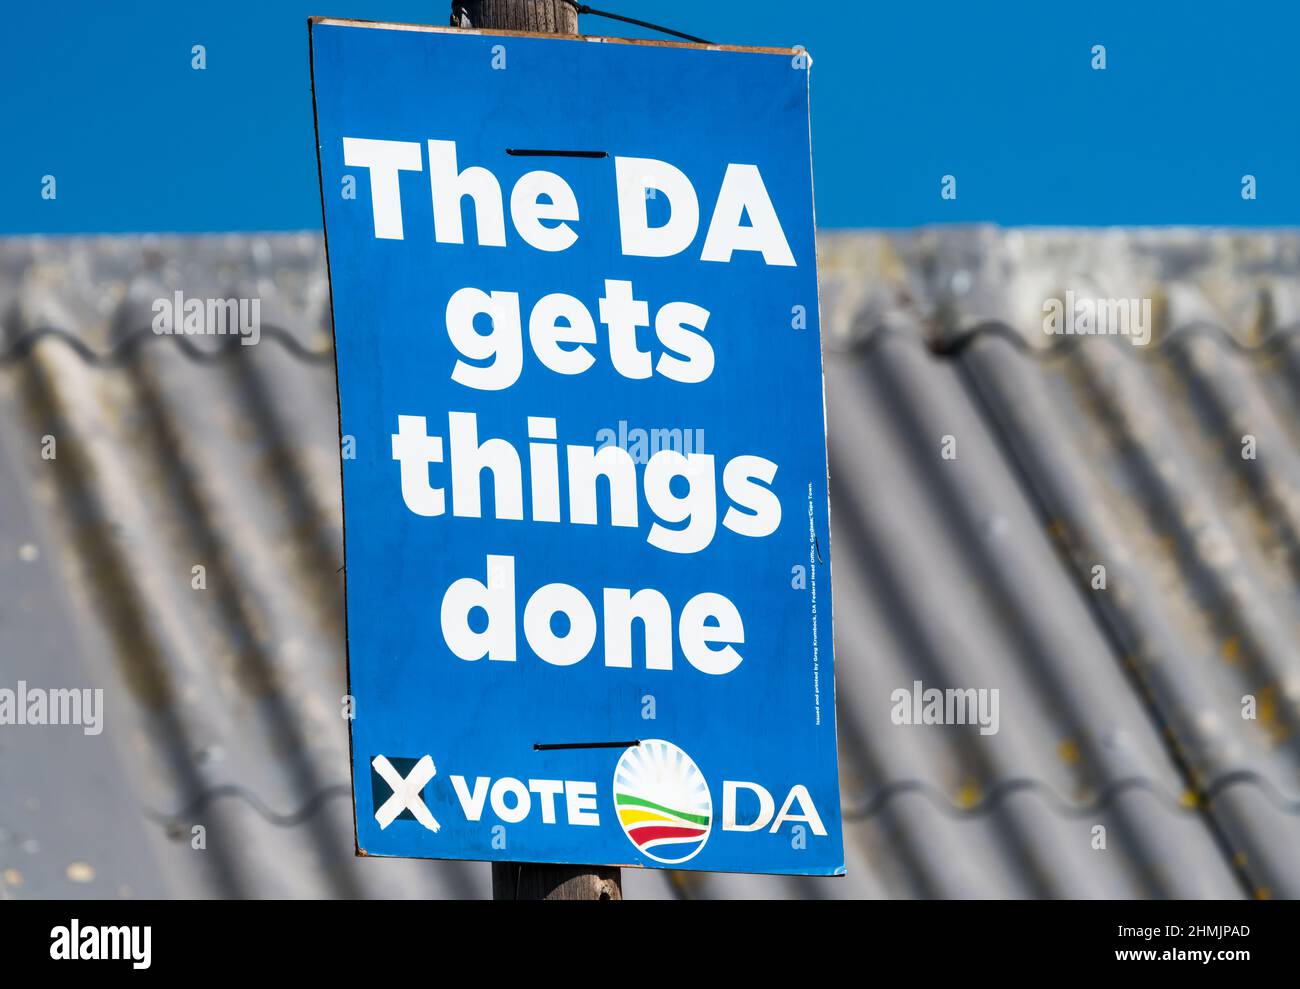 DA (Democratic alliance) political party campaign poster on a pole in Western Cape, South Africa concept politics and voting Stock Photo